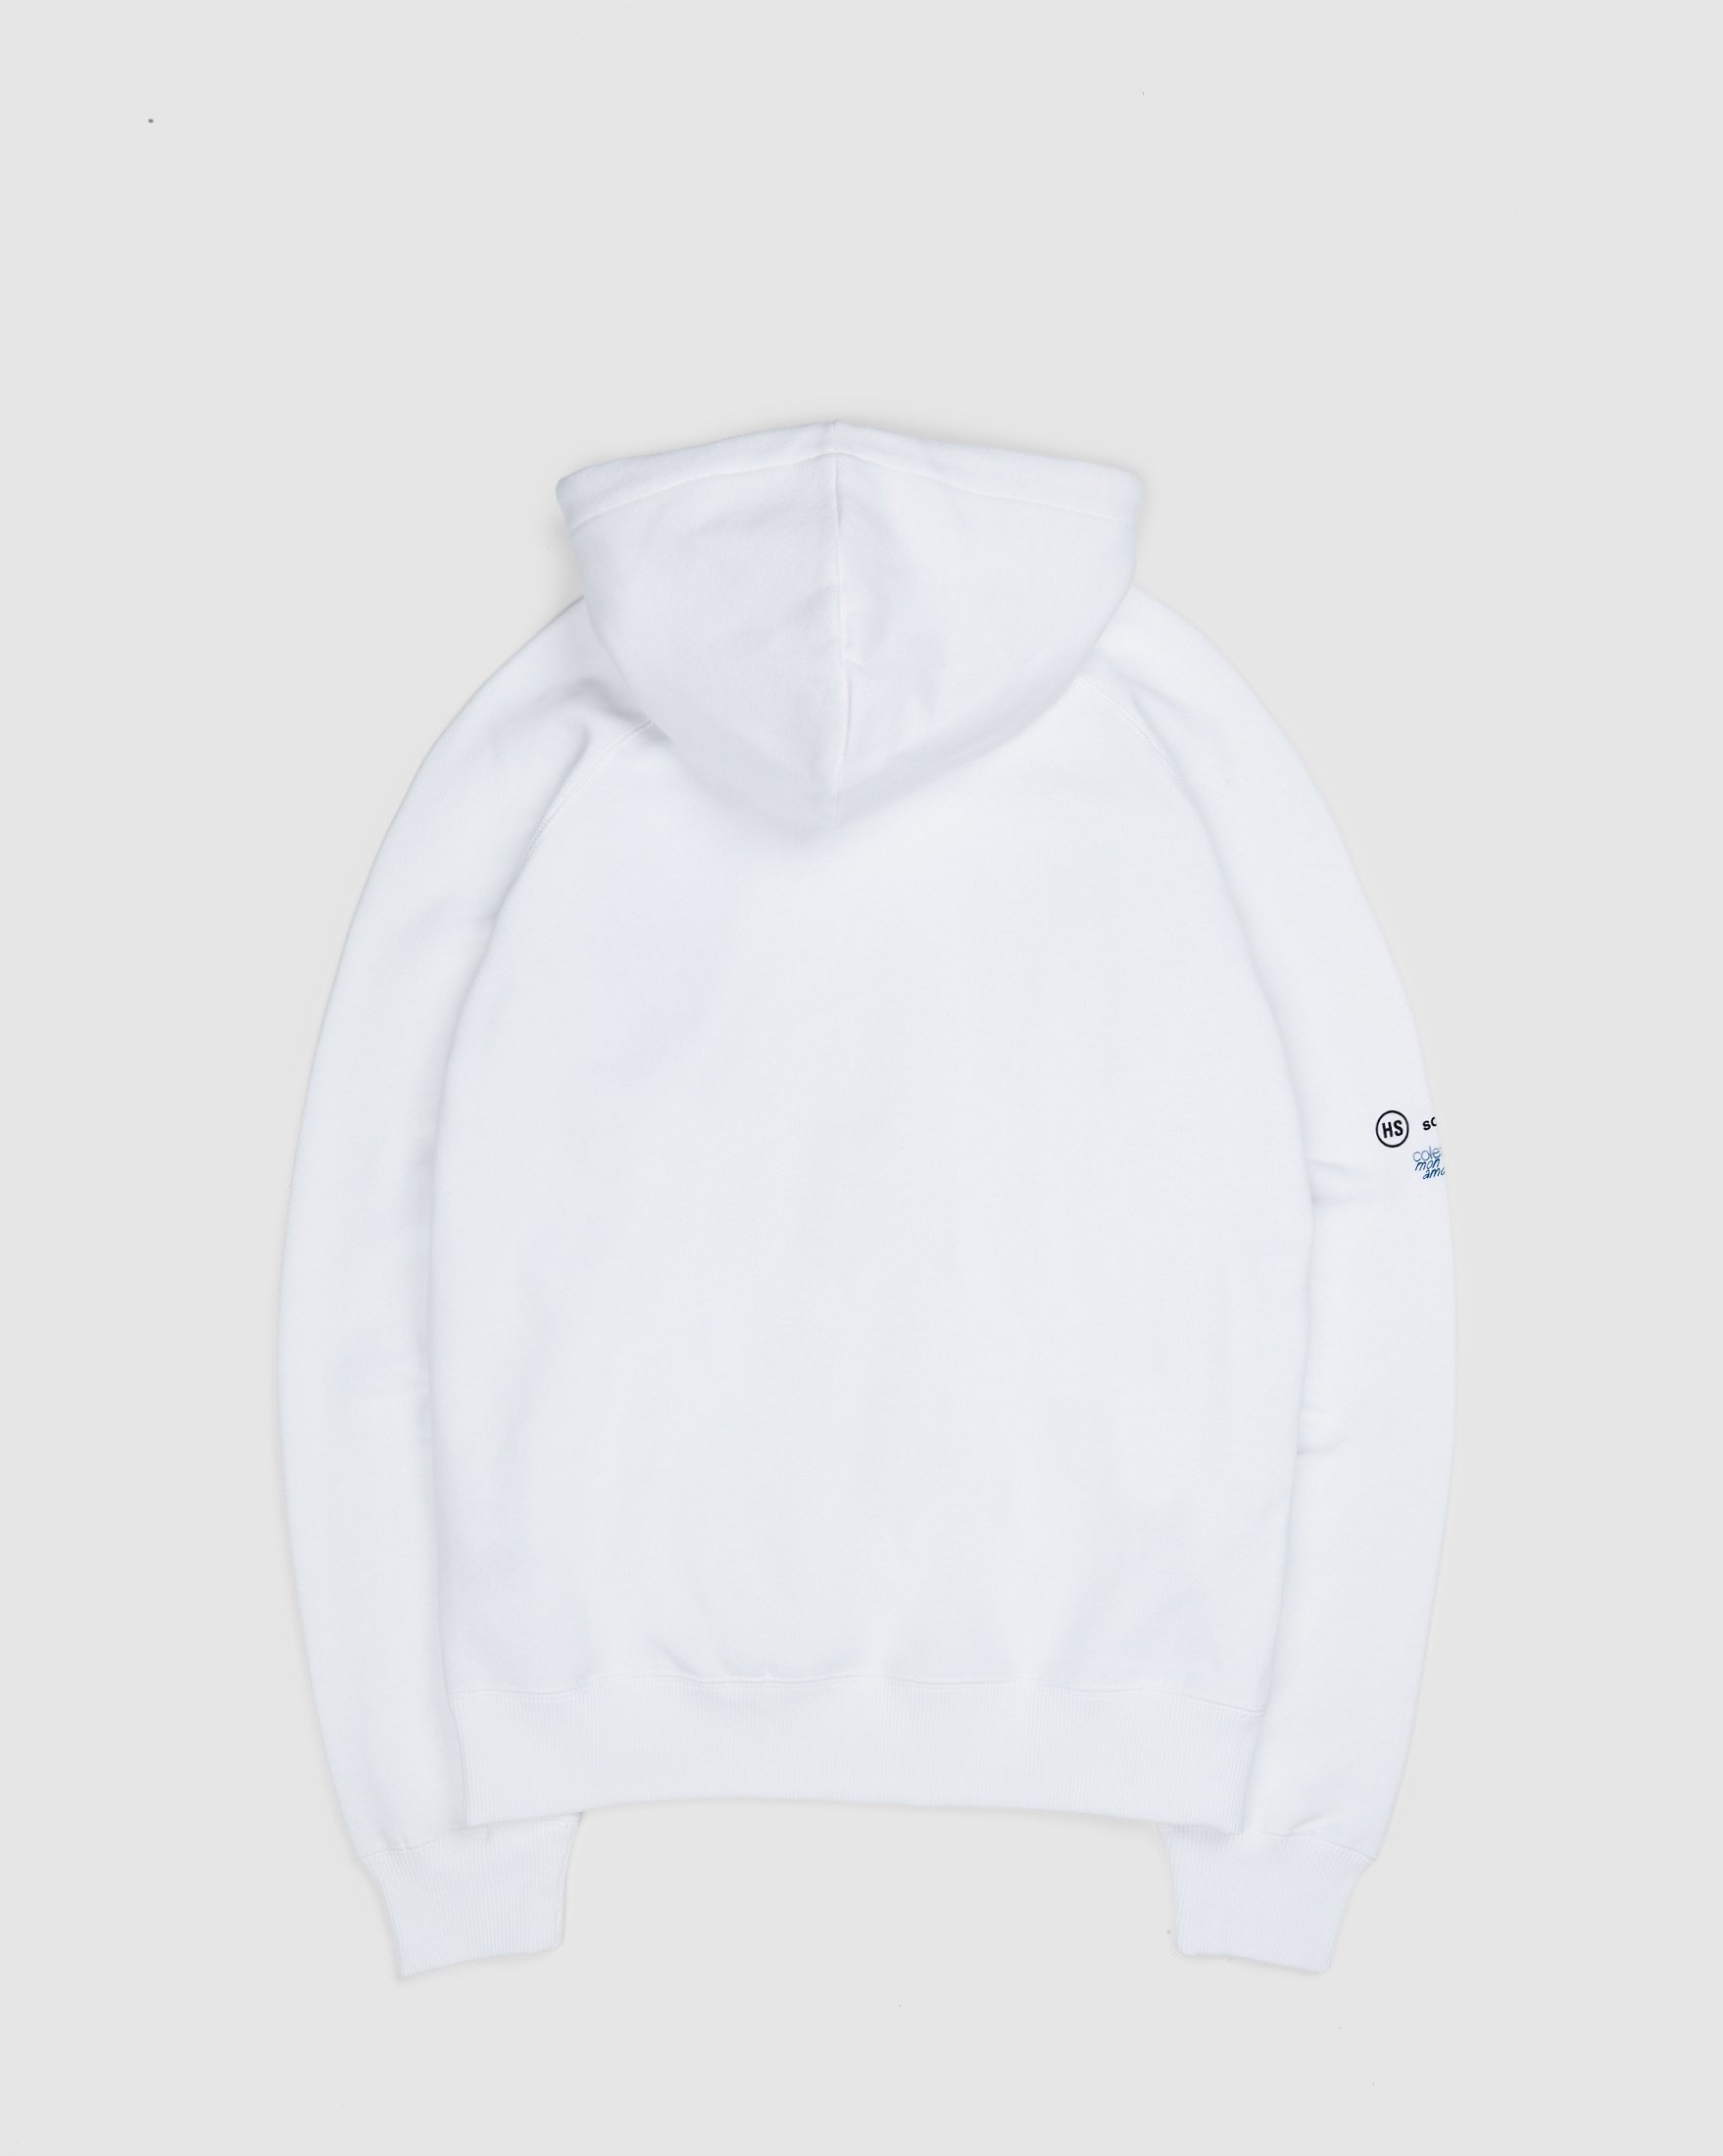 Colette Mon Amour x Soulland – Snoopy Bed White Hoodie - Sweats - White - Image 2